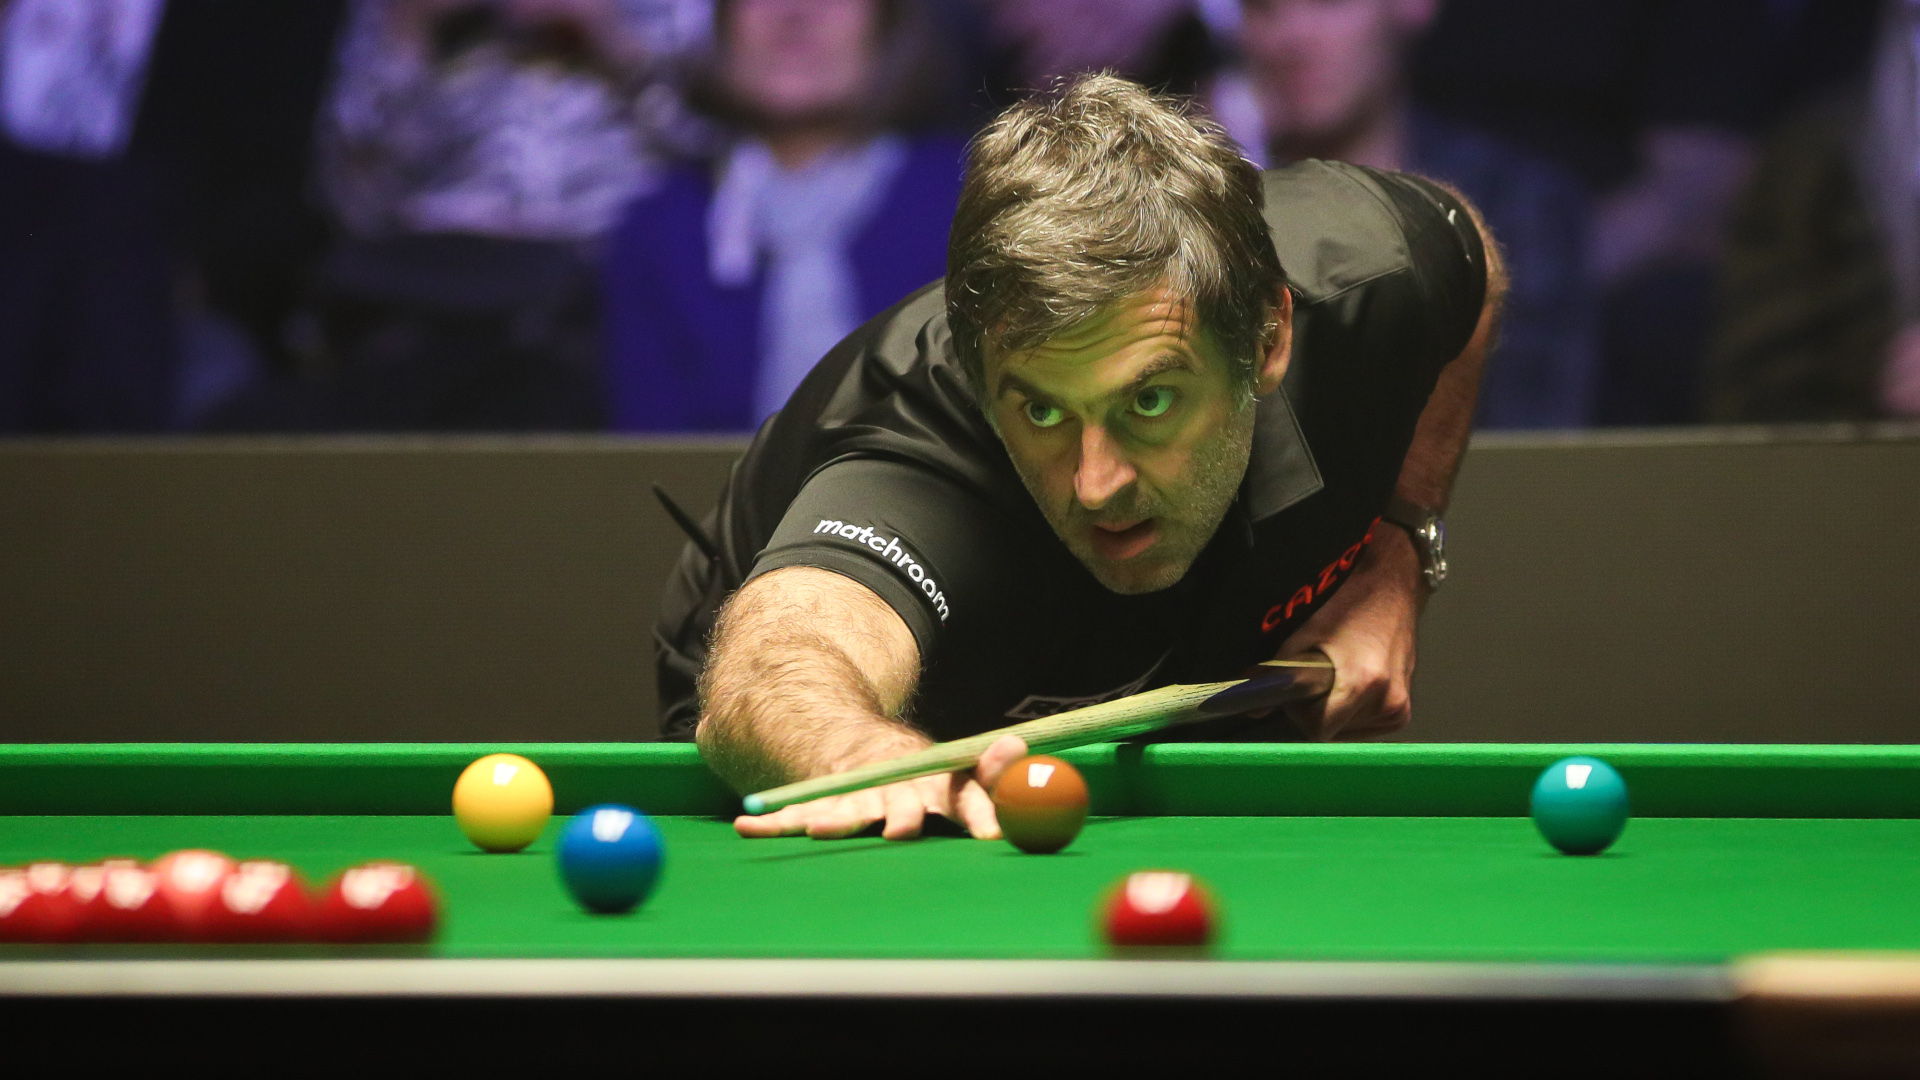 watch snooker championship live